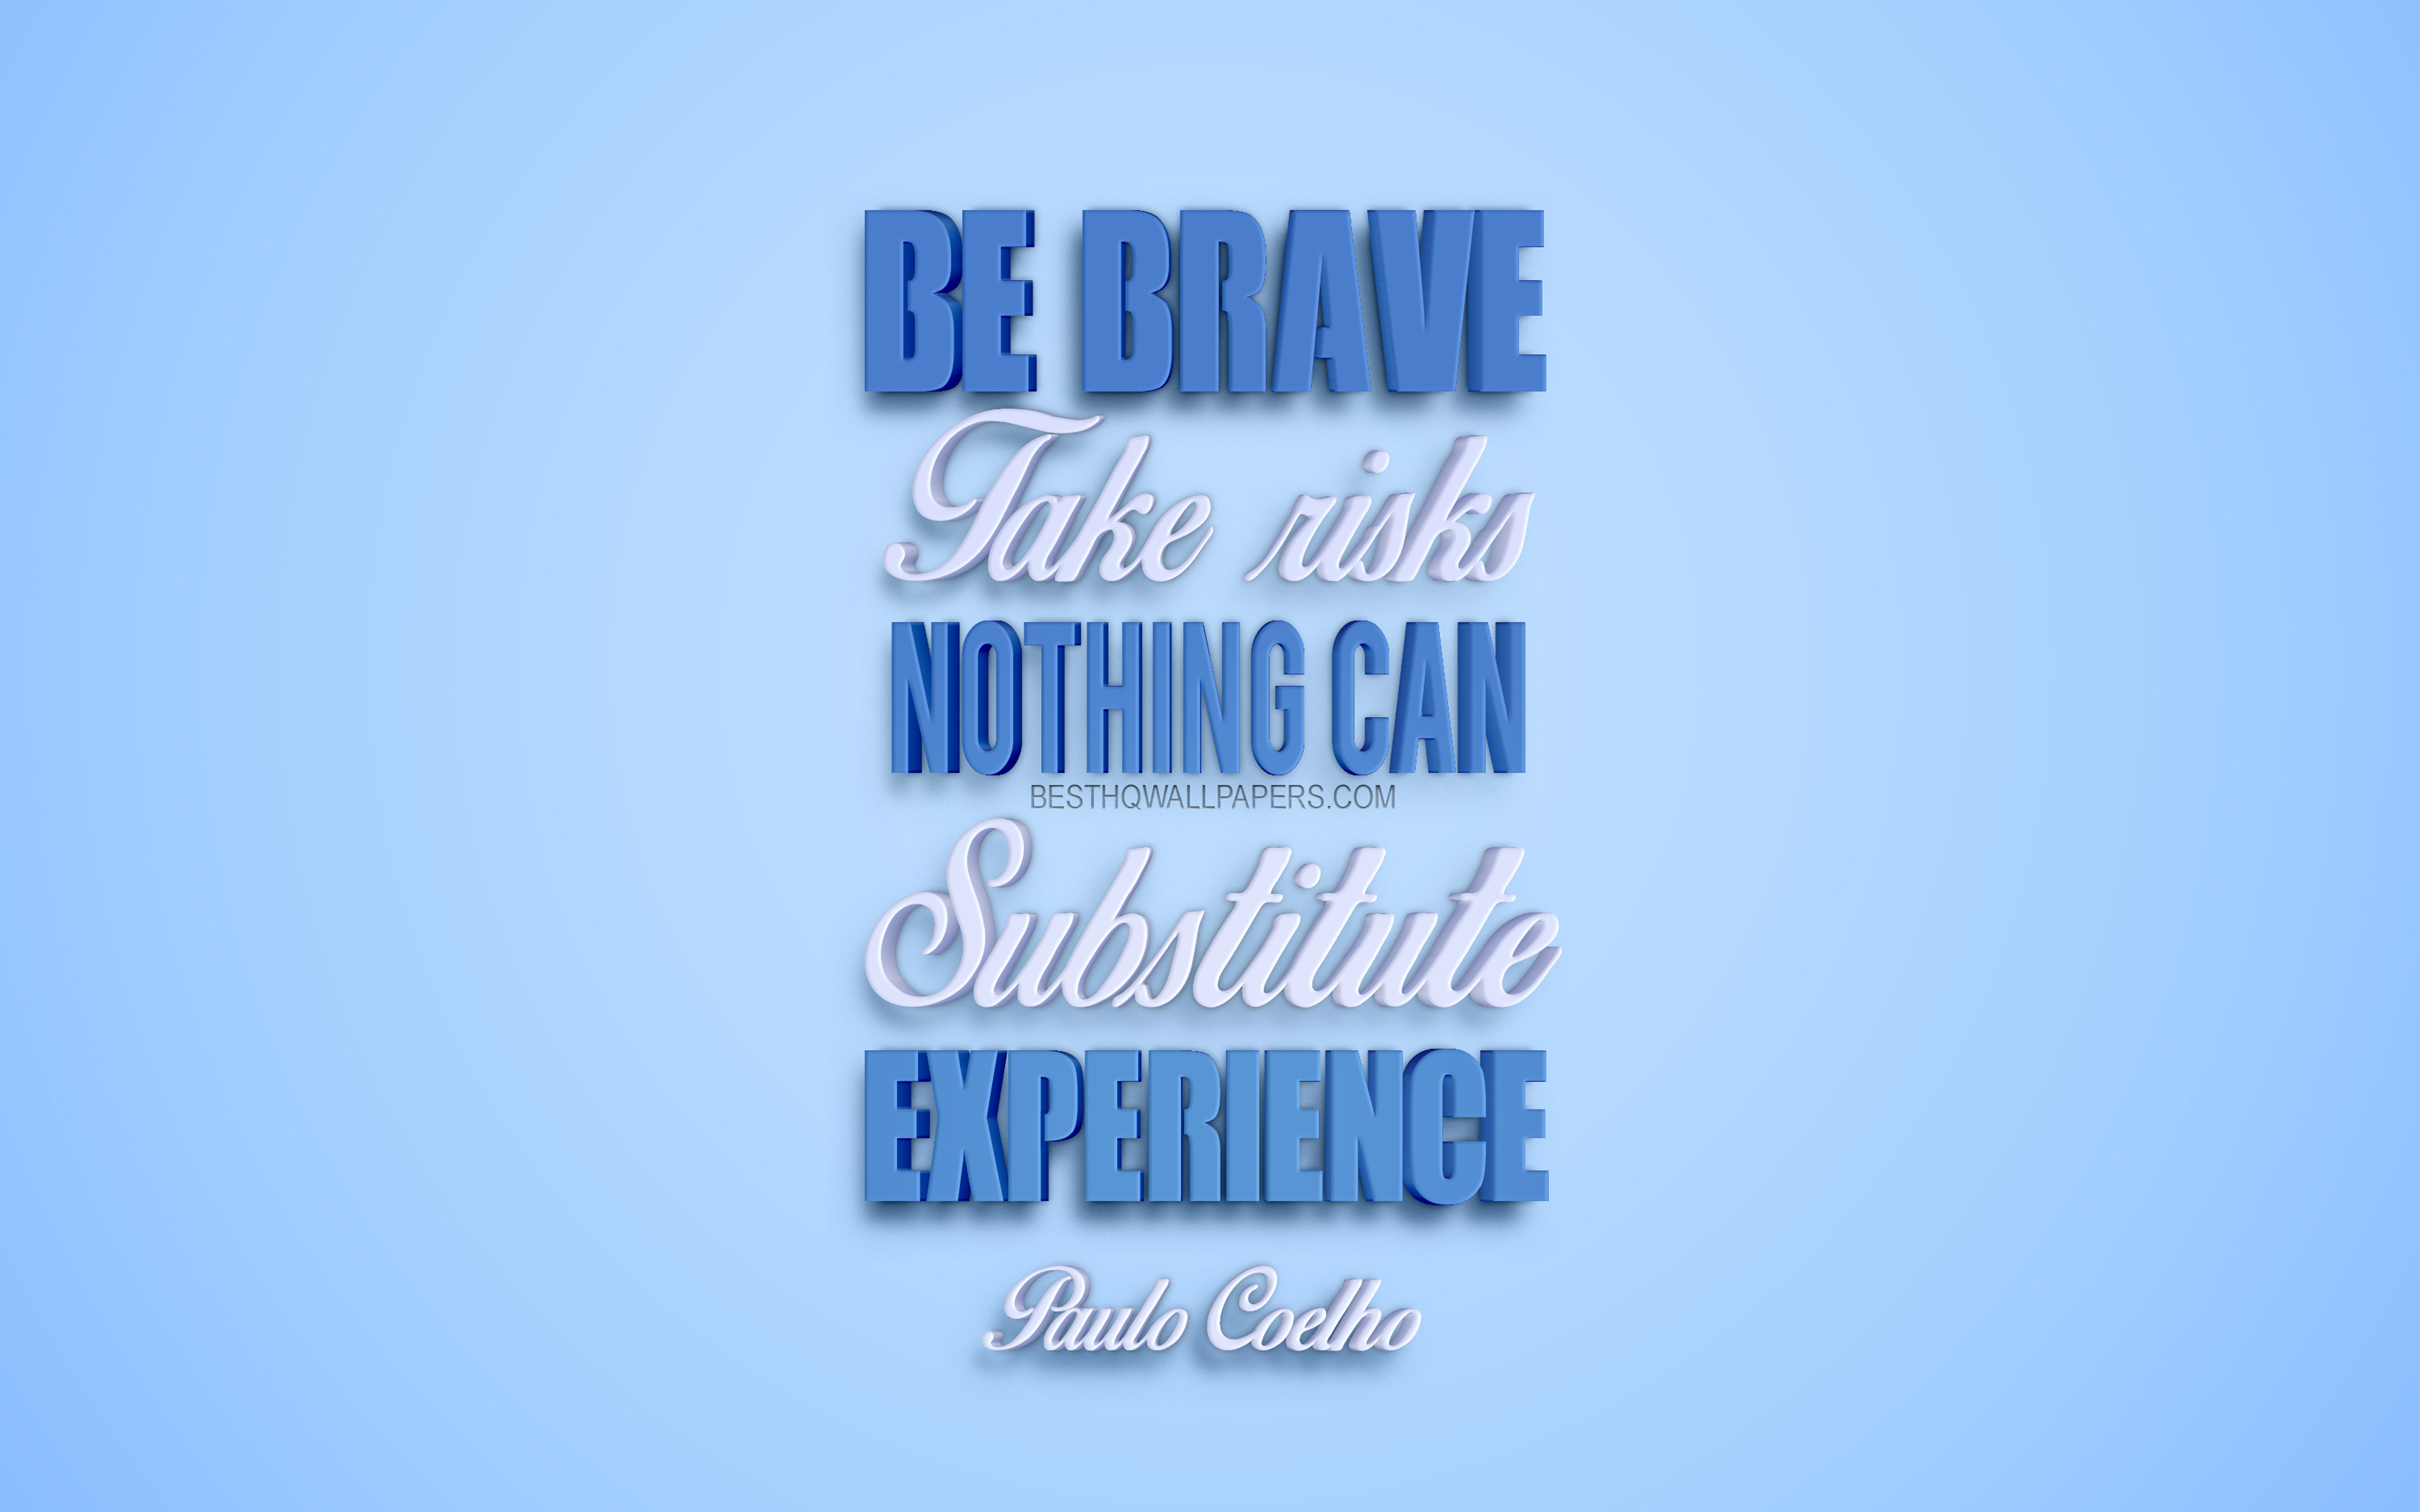 Be Brave Take Risks Nothing Can Substitute Experience, - Infiniti - HD Wallpaper 